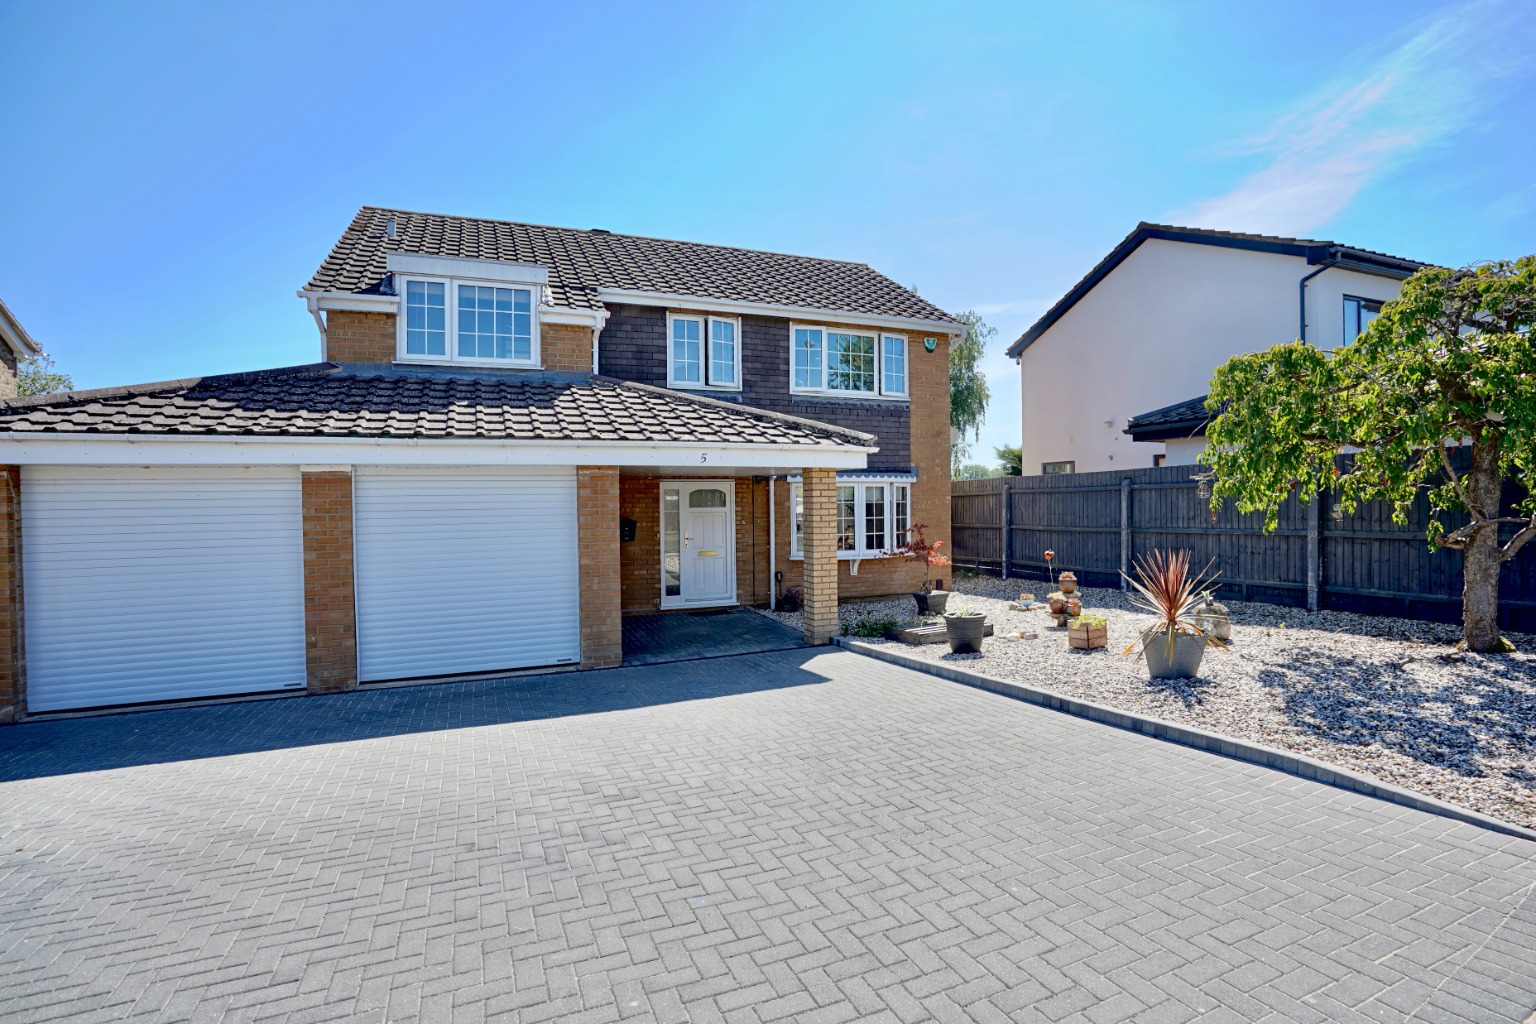 4 bed detached house for sale in Field Close, St. Neots - Property Image 1